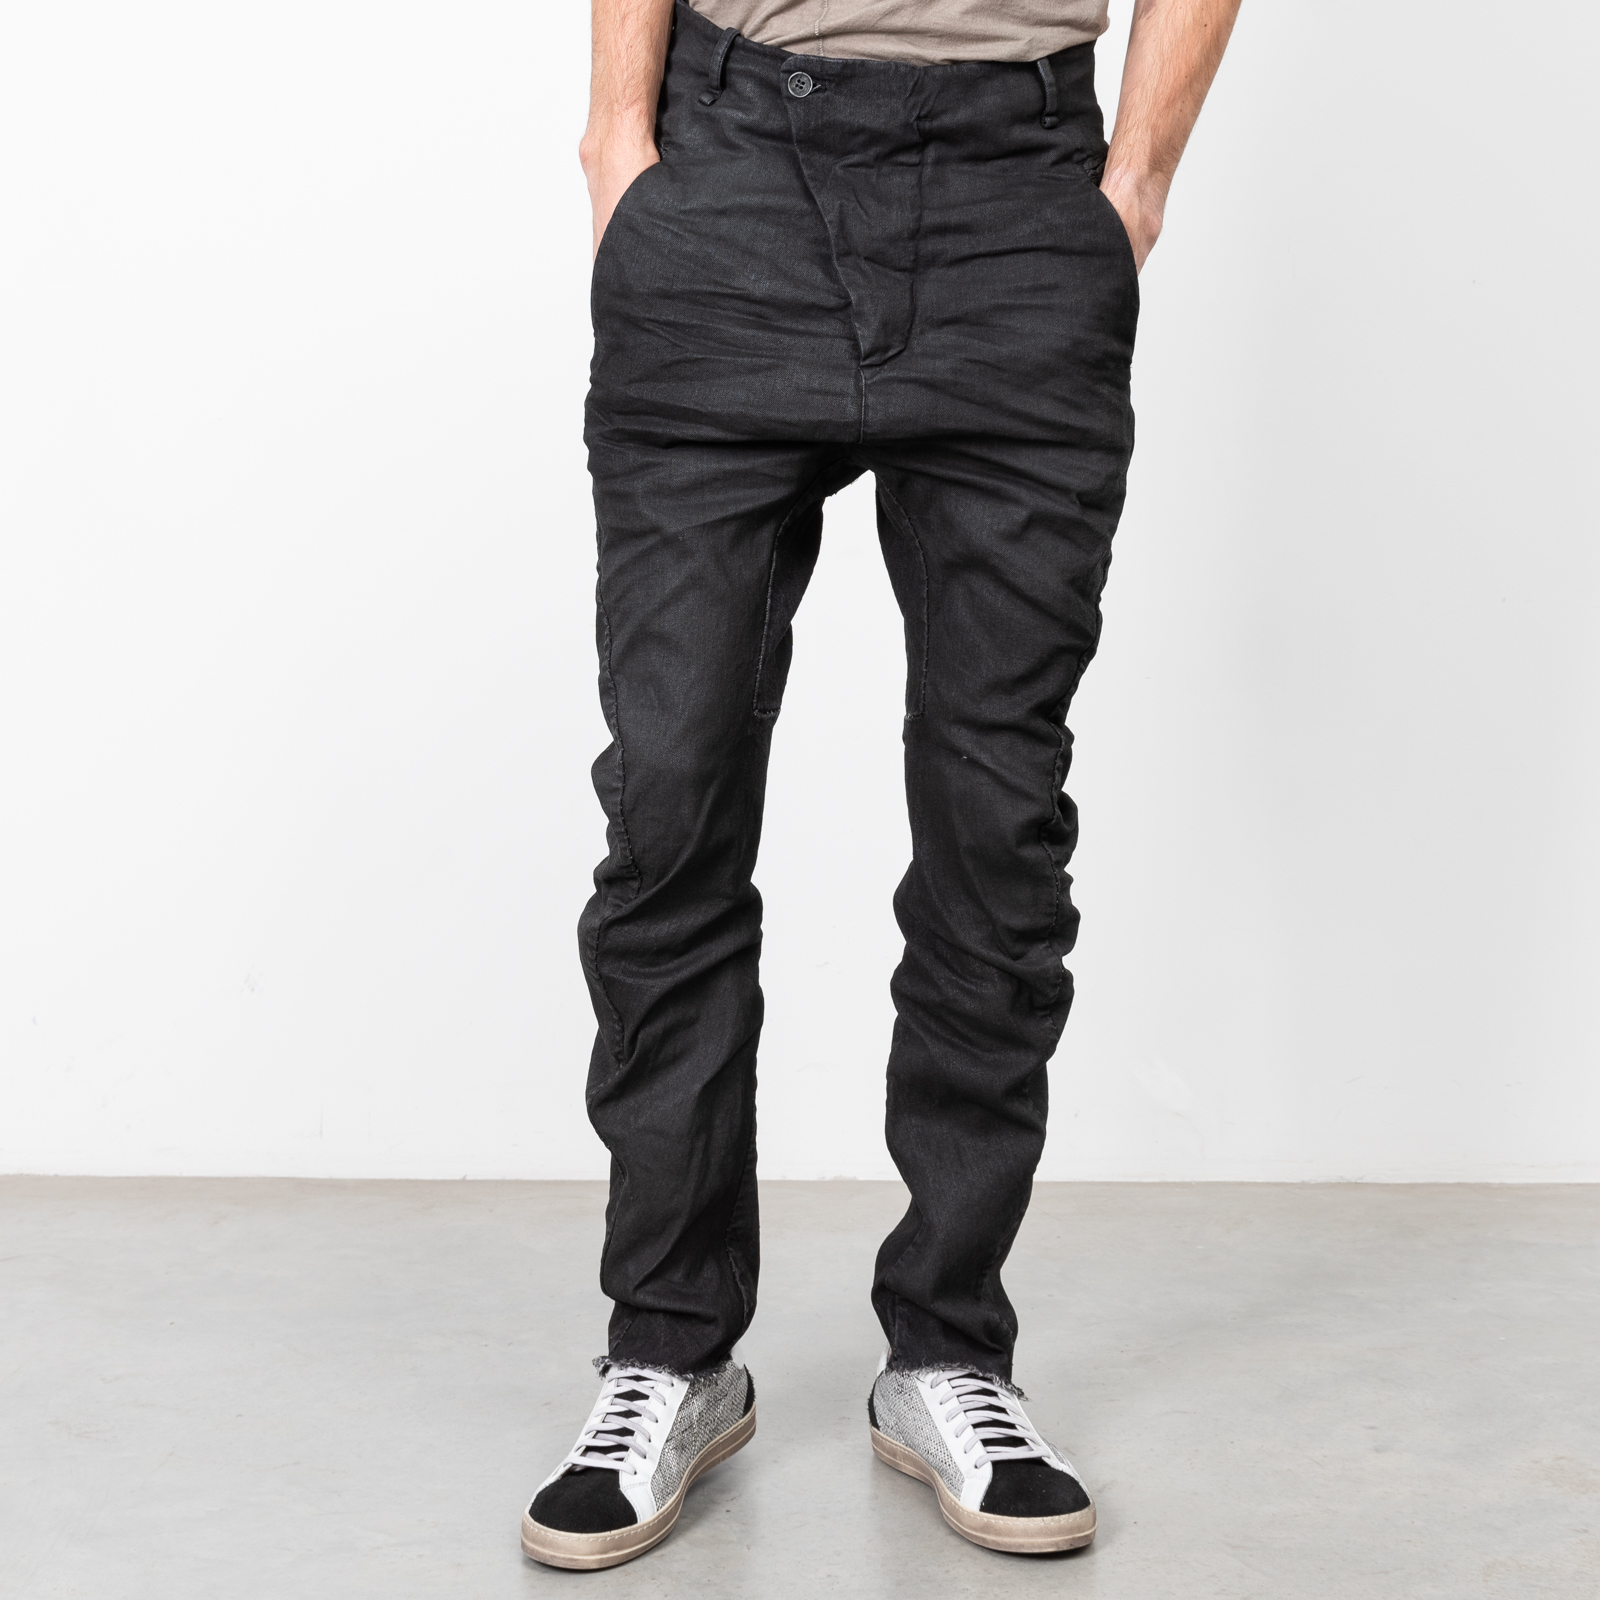 BLACK WAXED BAGGY PANTS|wolfensson